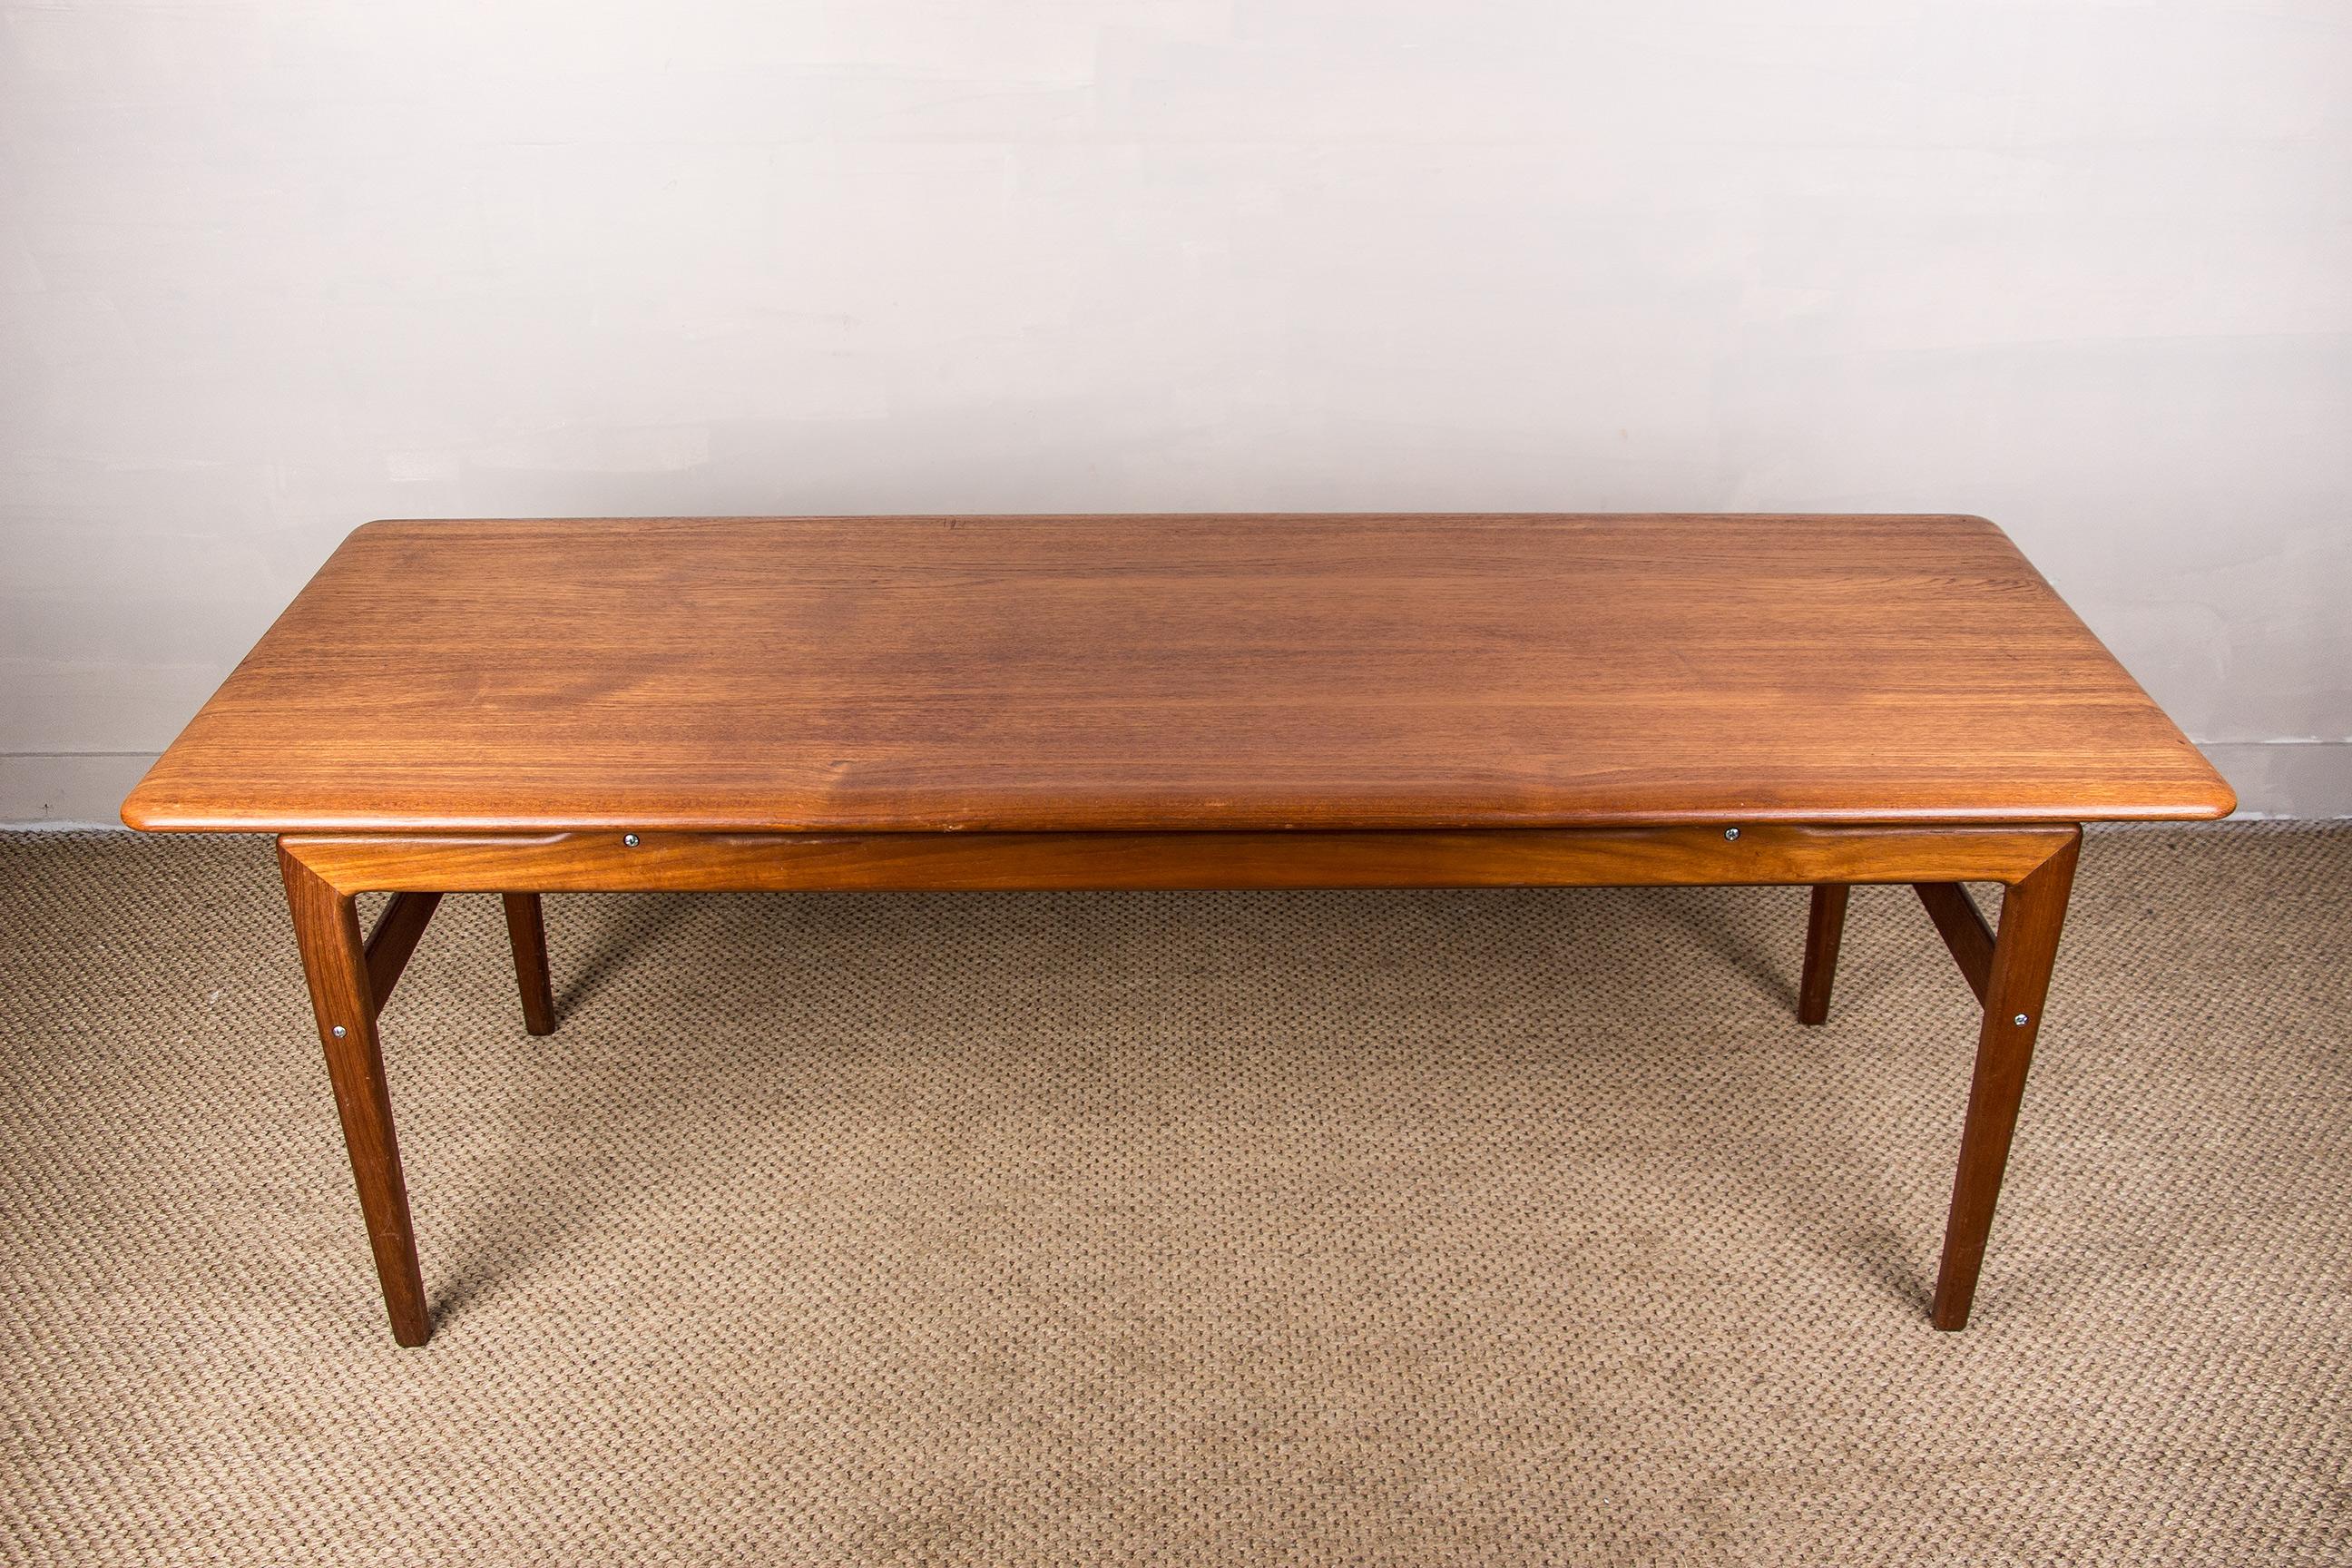 Large Danish Coffee Table in Teak with Document Ranges, 1960 For Sale 2